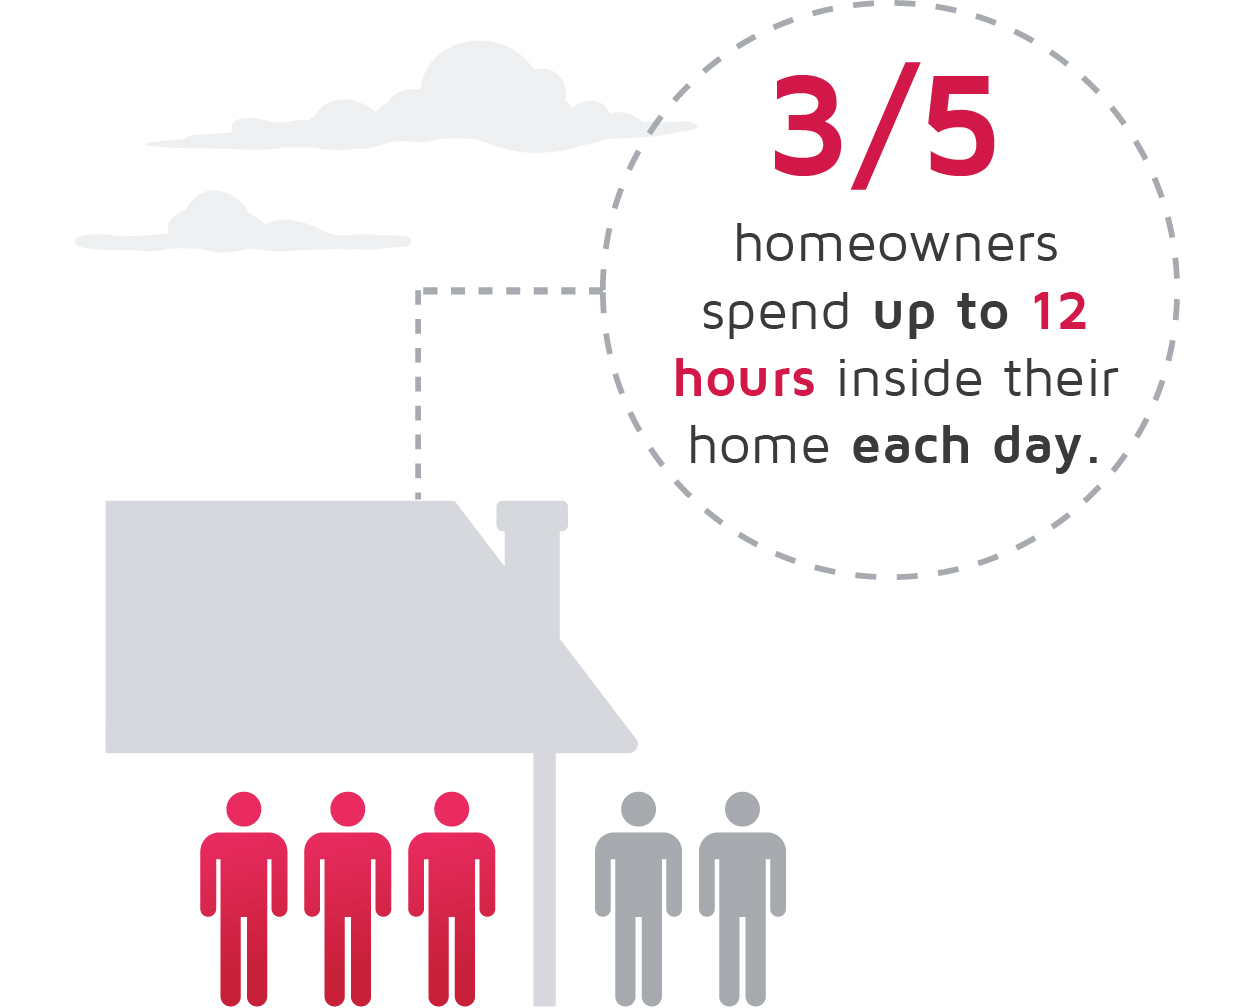 3/5 homeowners spend up to 12 hours inside their home each day.